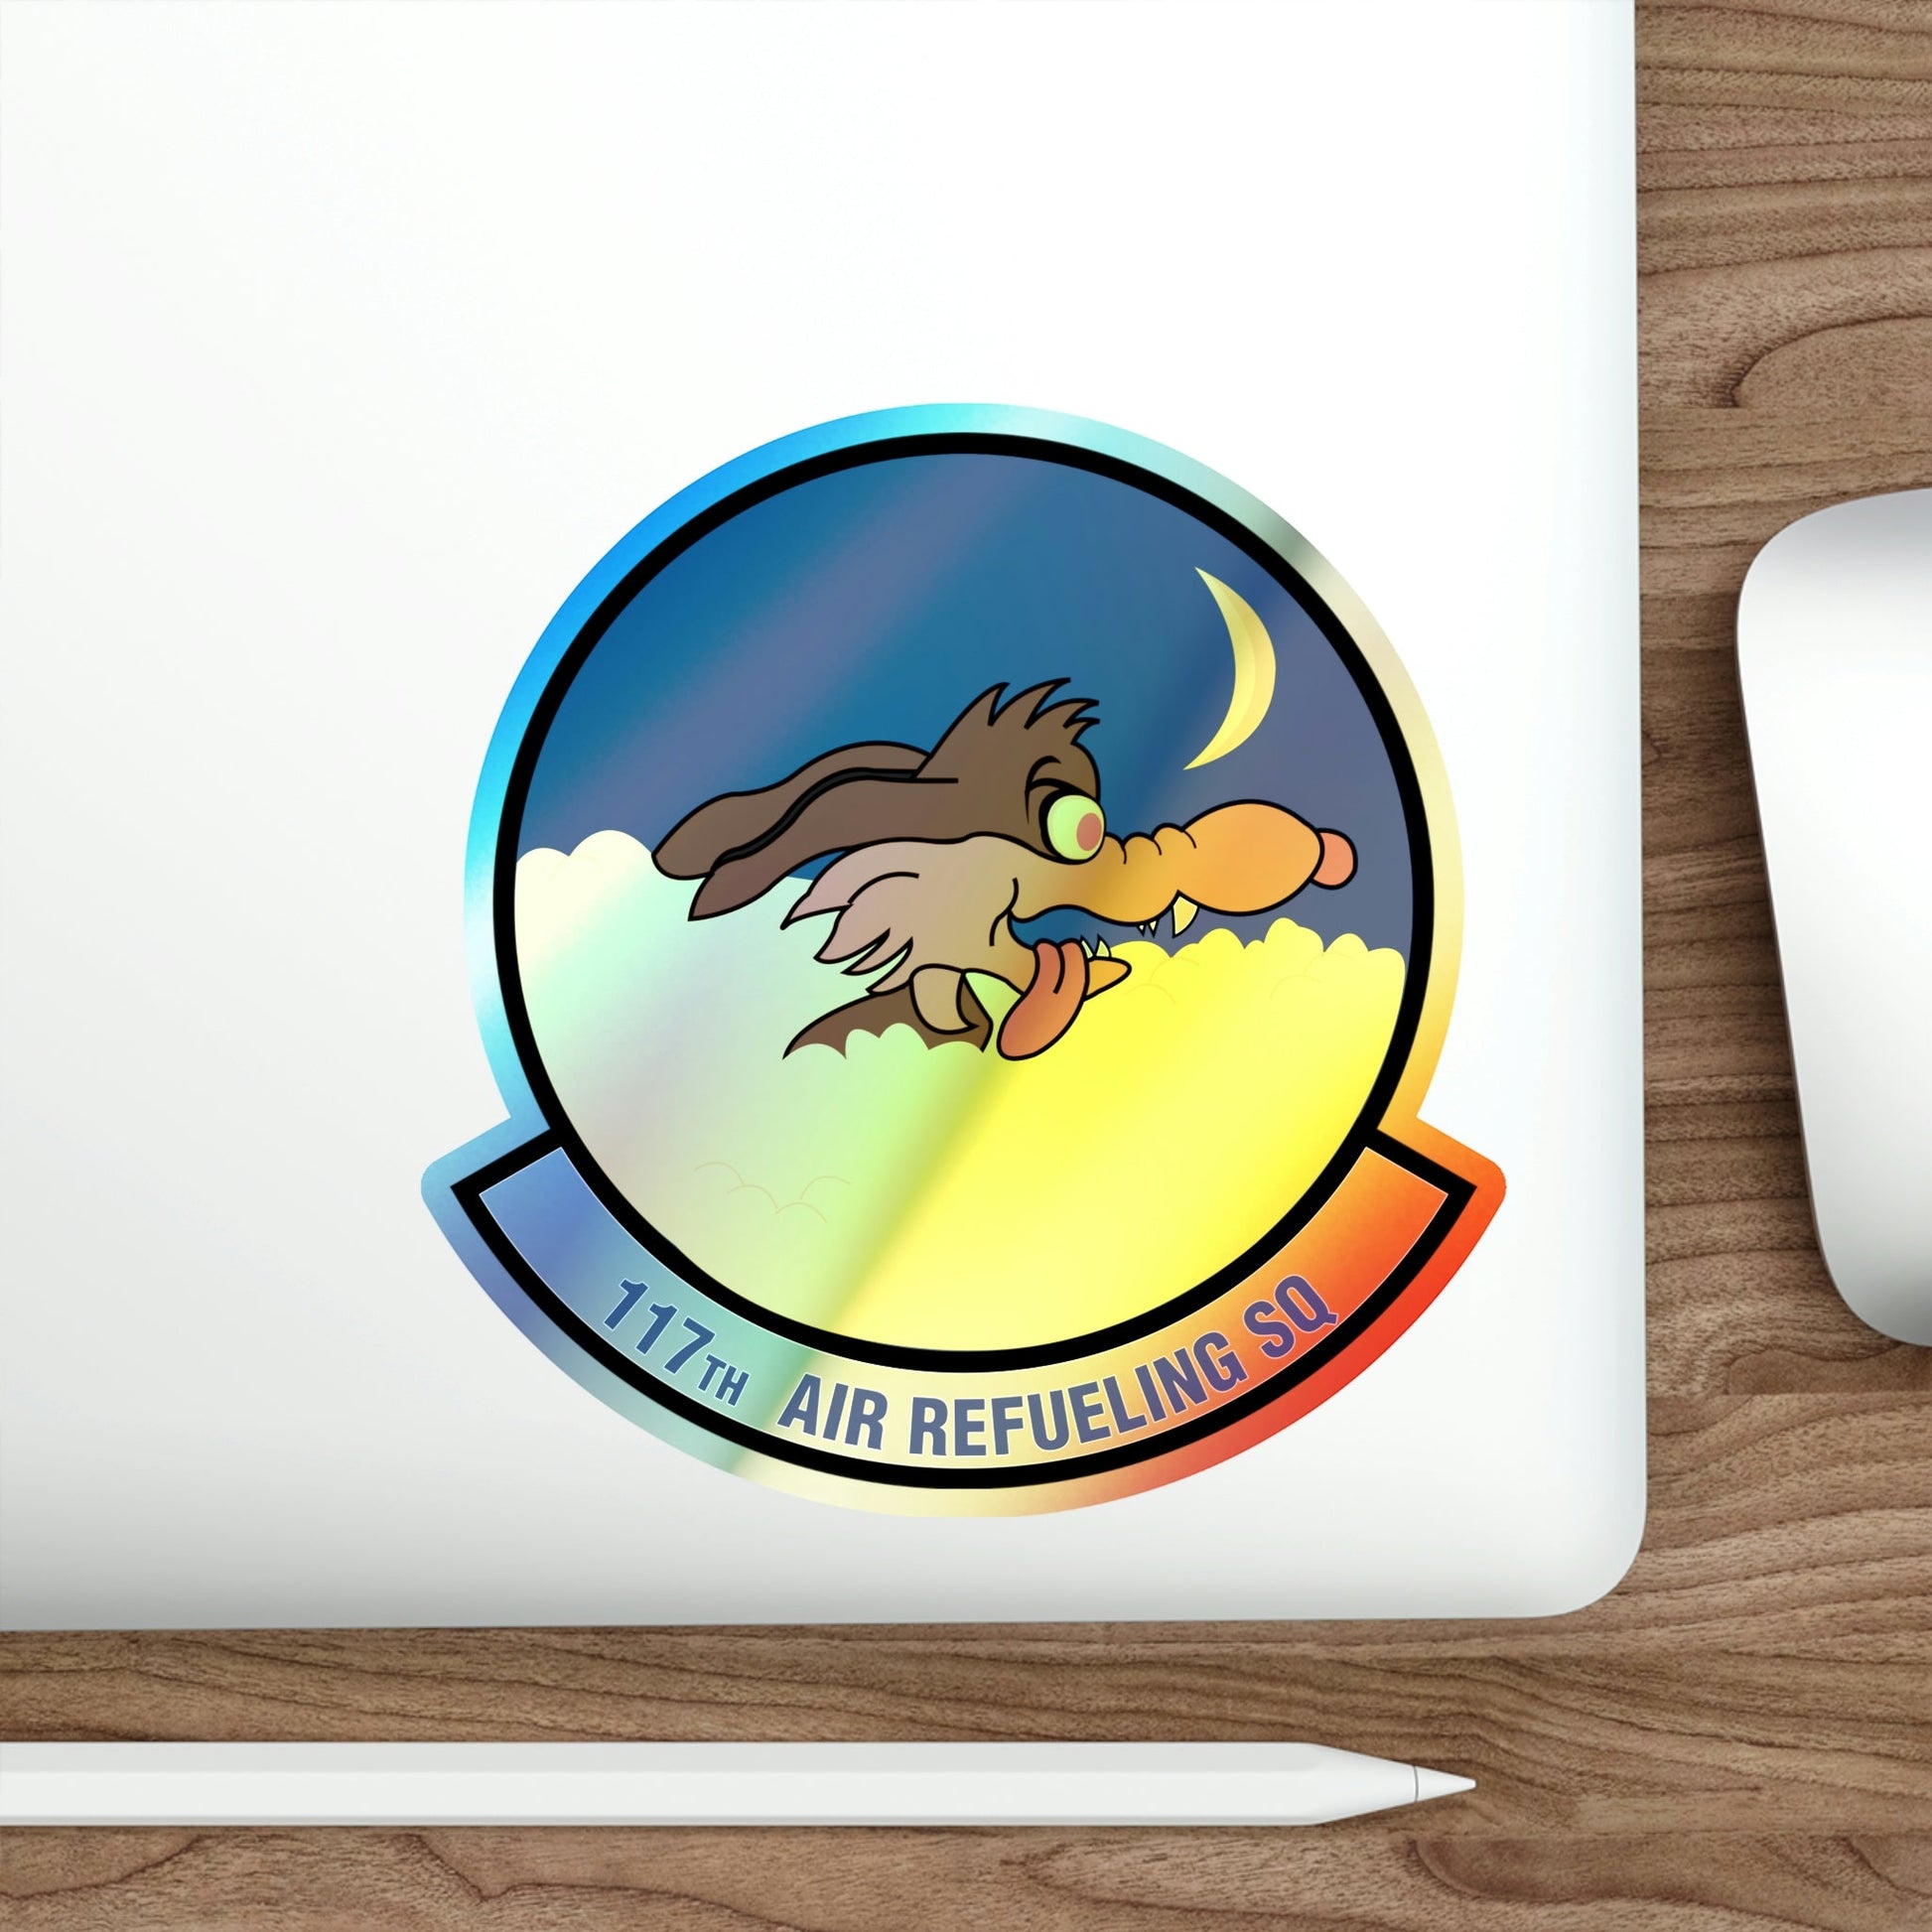 117 Air Refueling Squadron (U.S. Air Force) Holographic STICKER Die-Cut Vinyl Decal-The Sticker Space